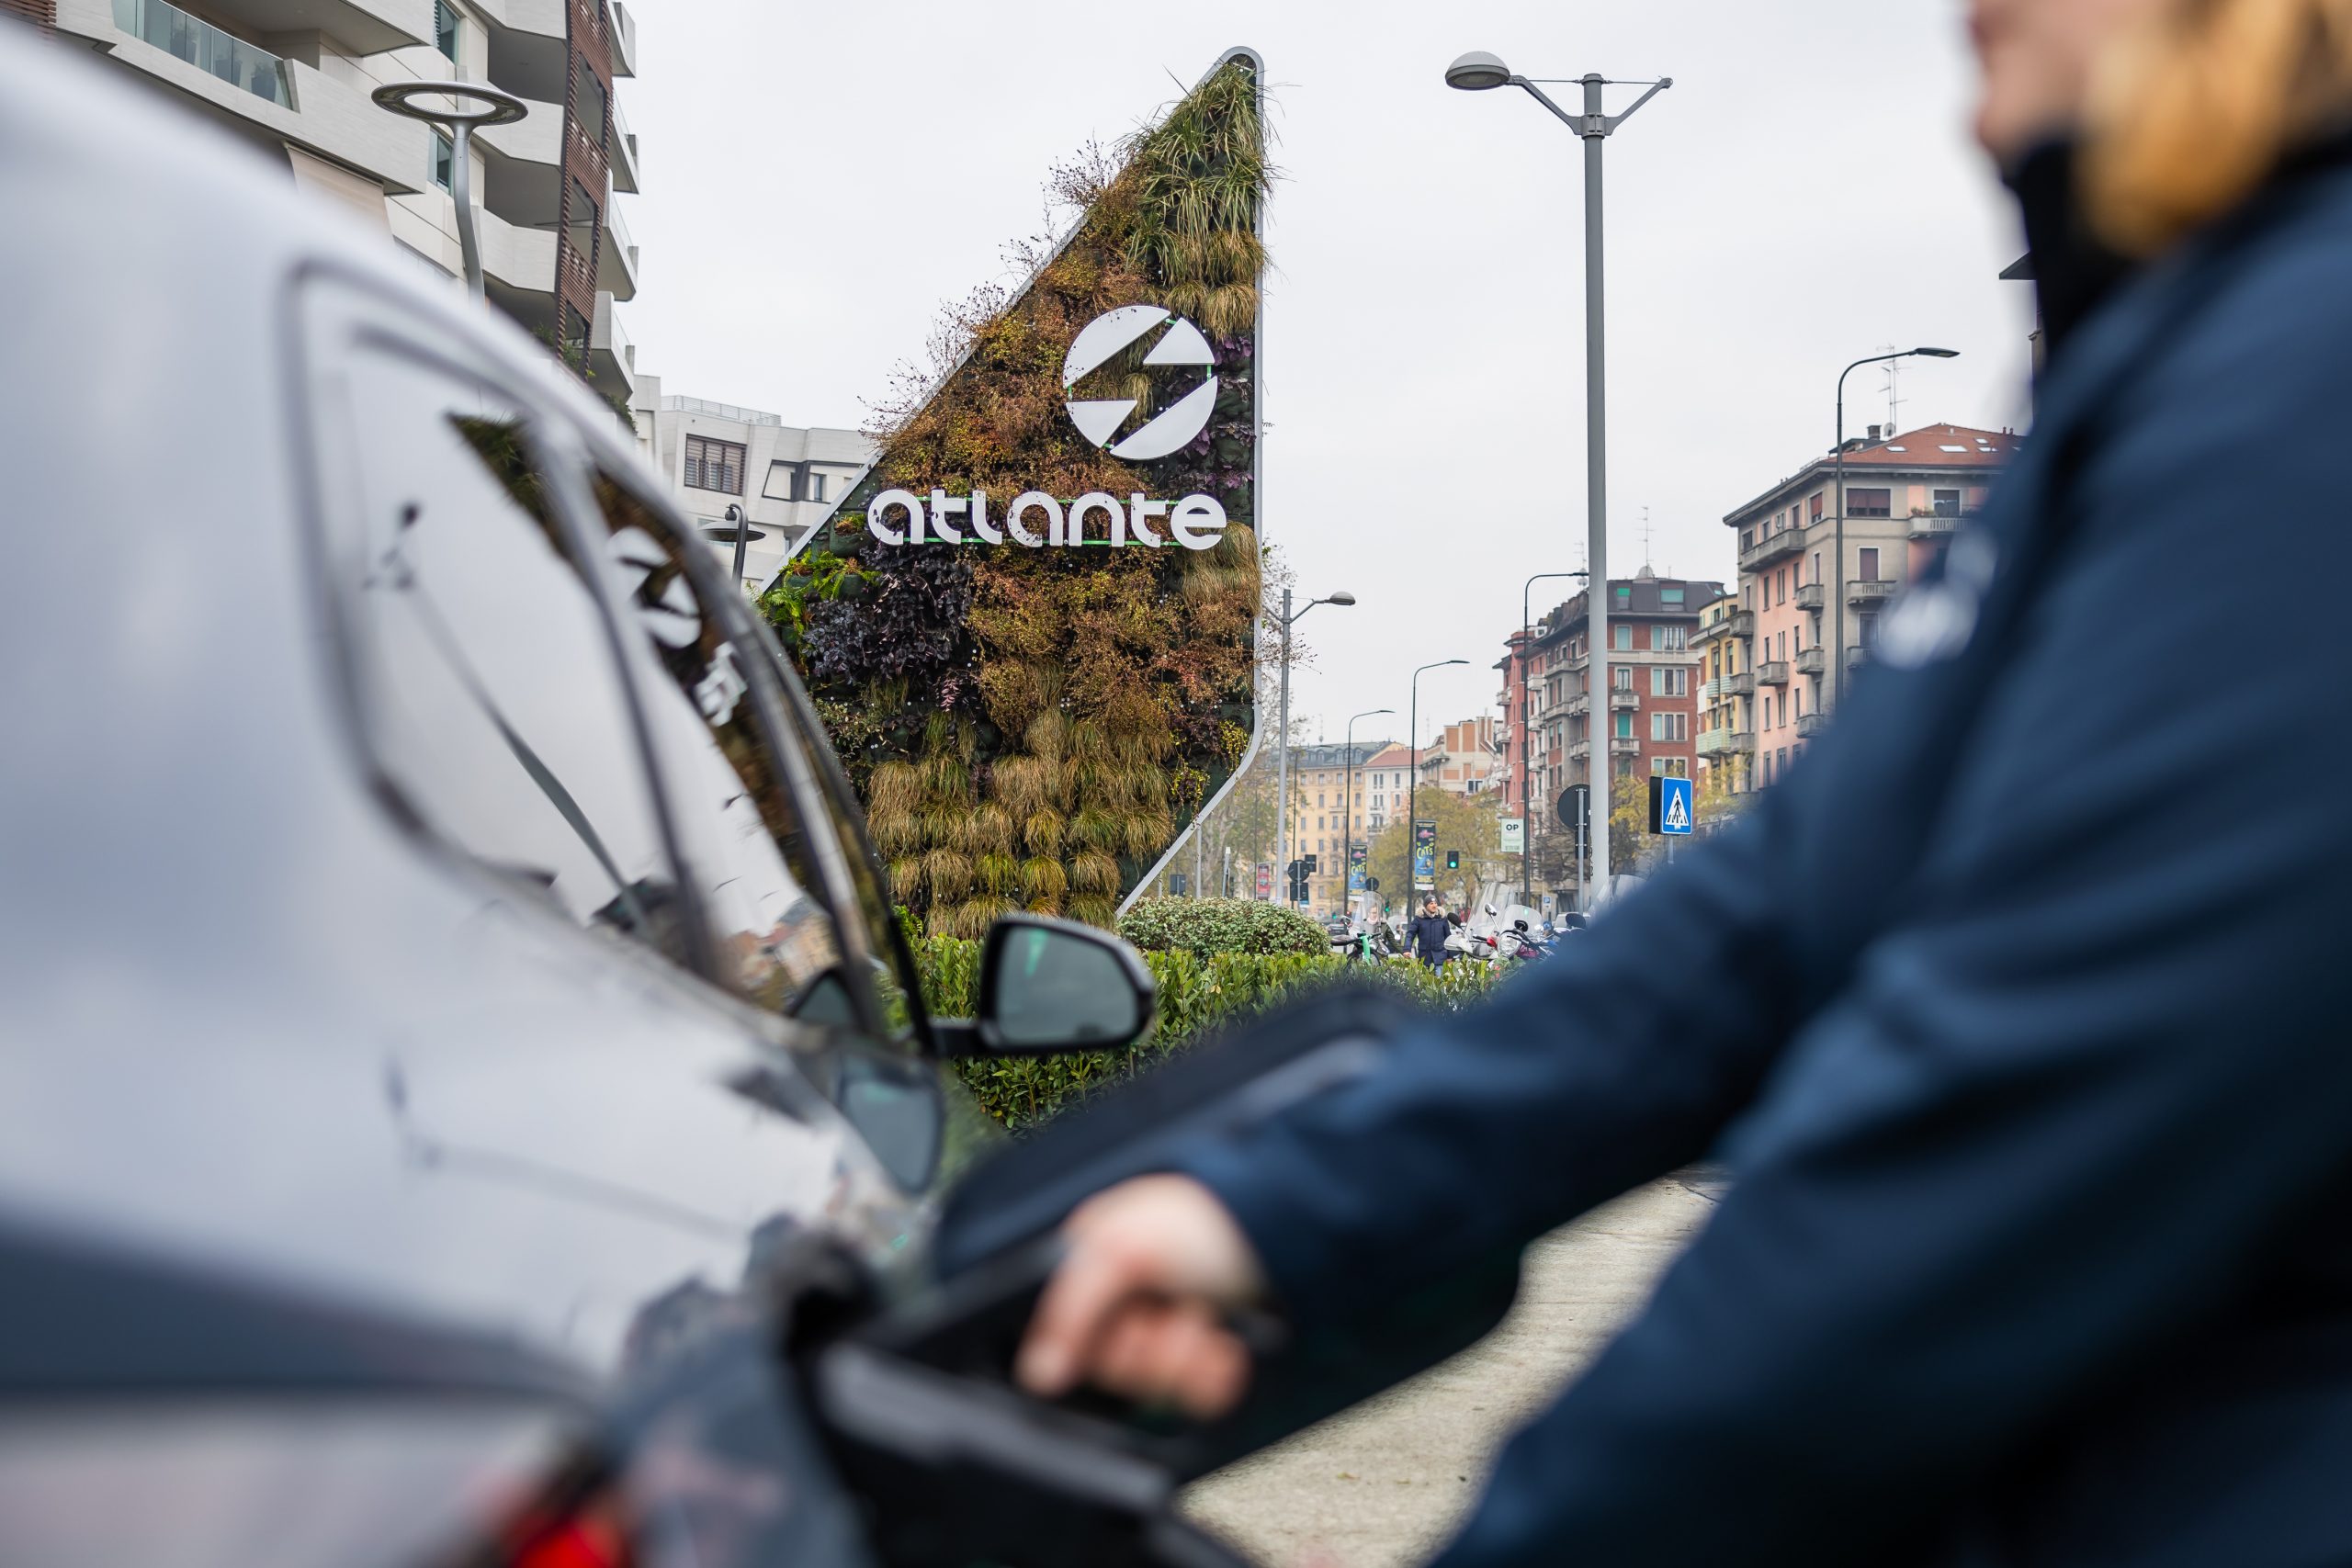 Leveraging its expertise in fast and ultra-fast charging networks, Atlante collaborated with Wallbox to introduce the Supernova DC fast chargers at CityLife